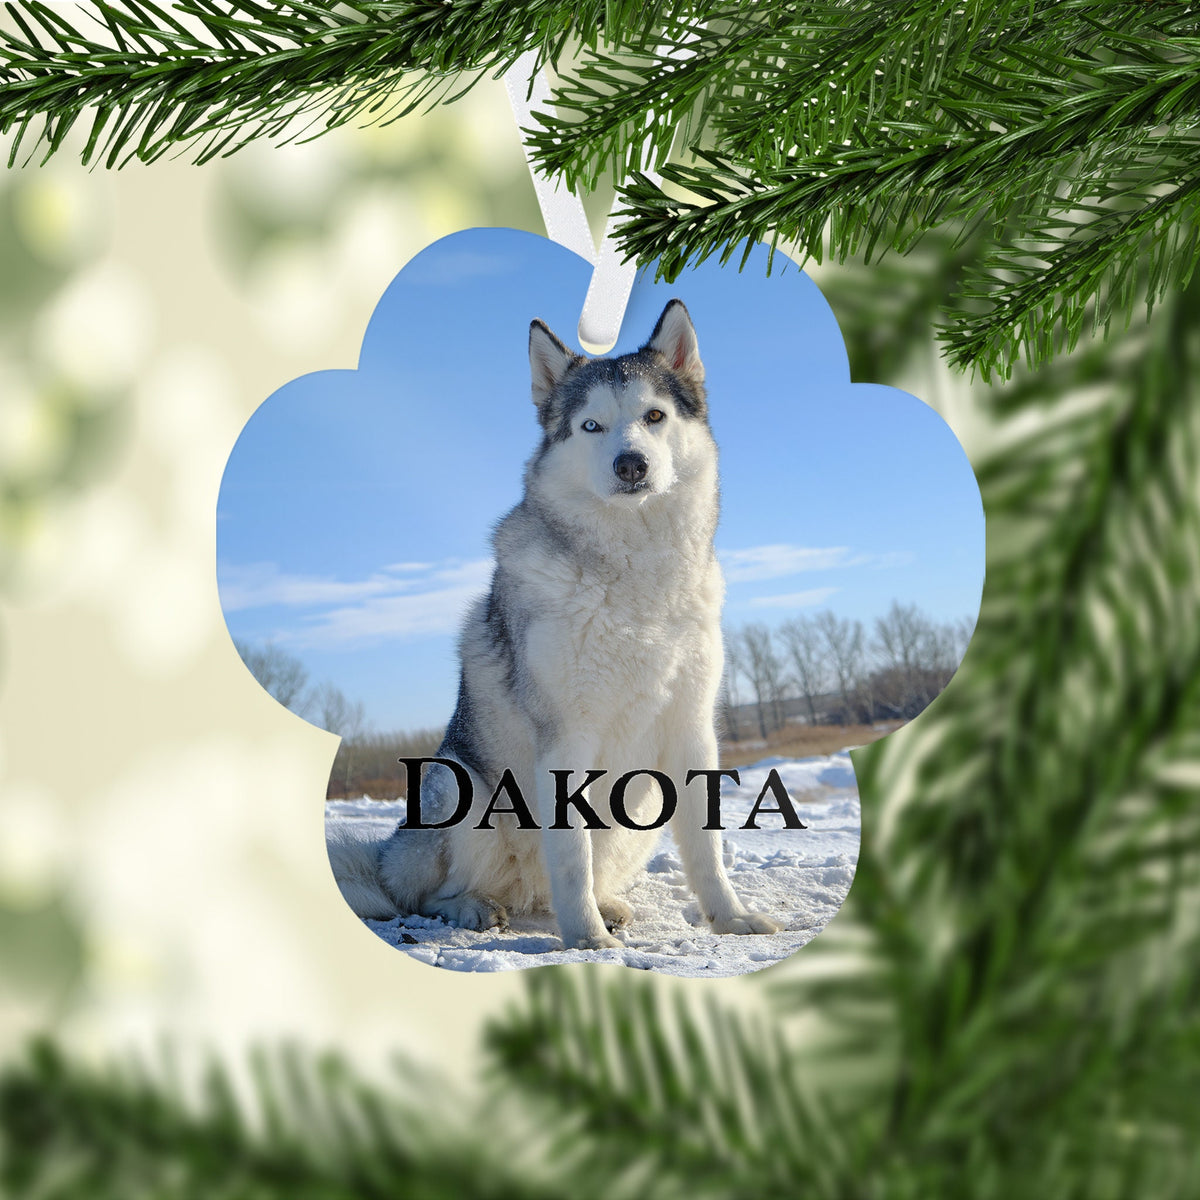 Photo Holiday Ornaments | Personalized Christmas Ornaments | Pet Memory